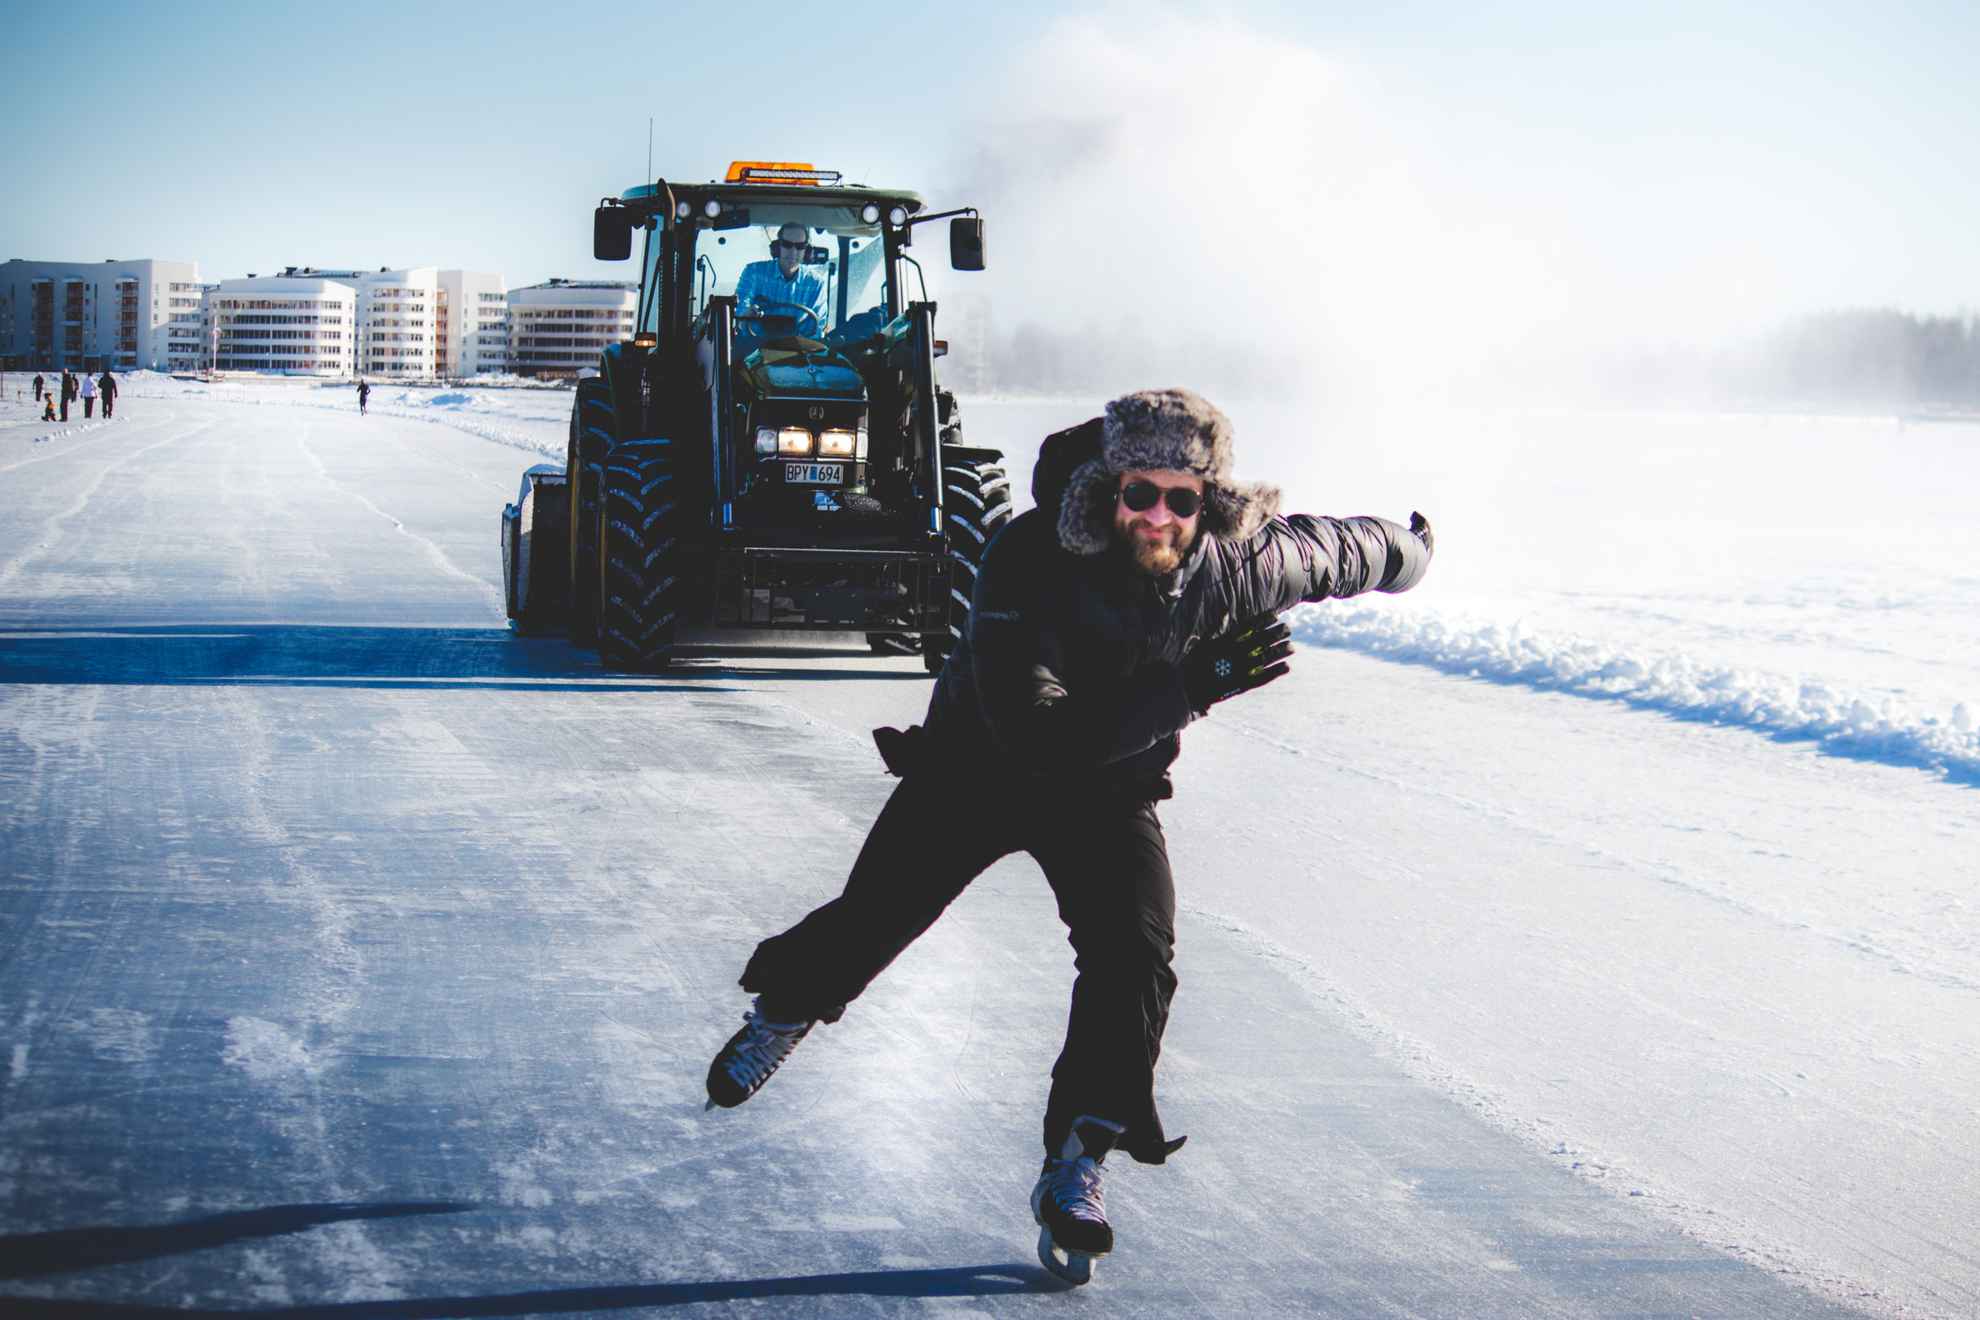 Man dressed in black skating on ice with a tractor behing him